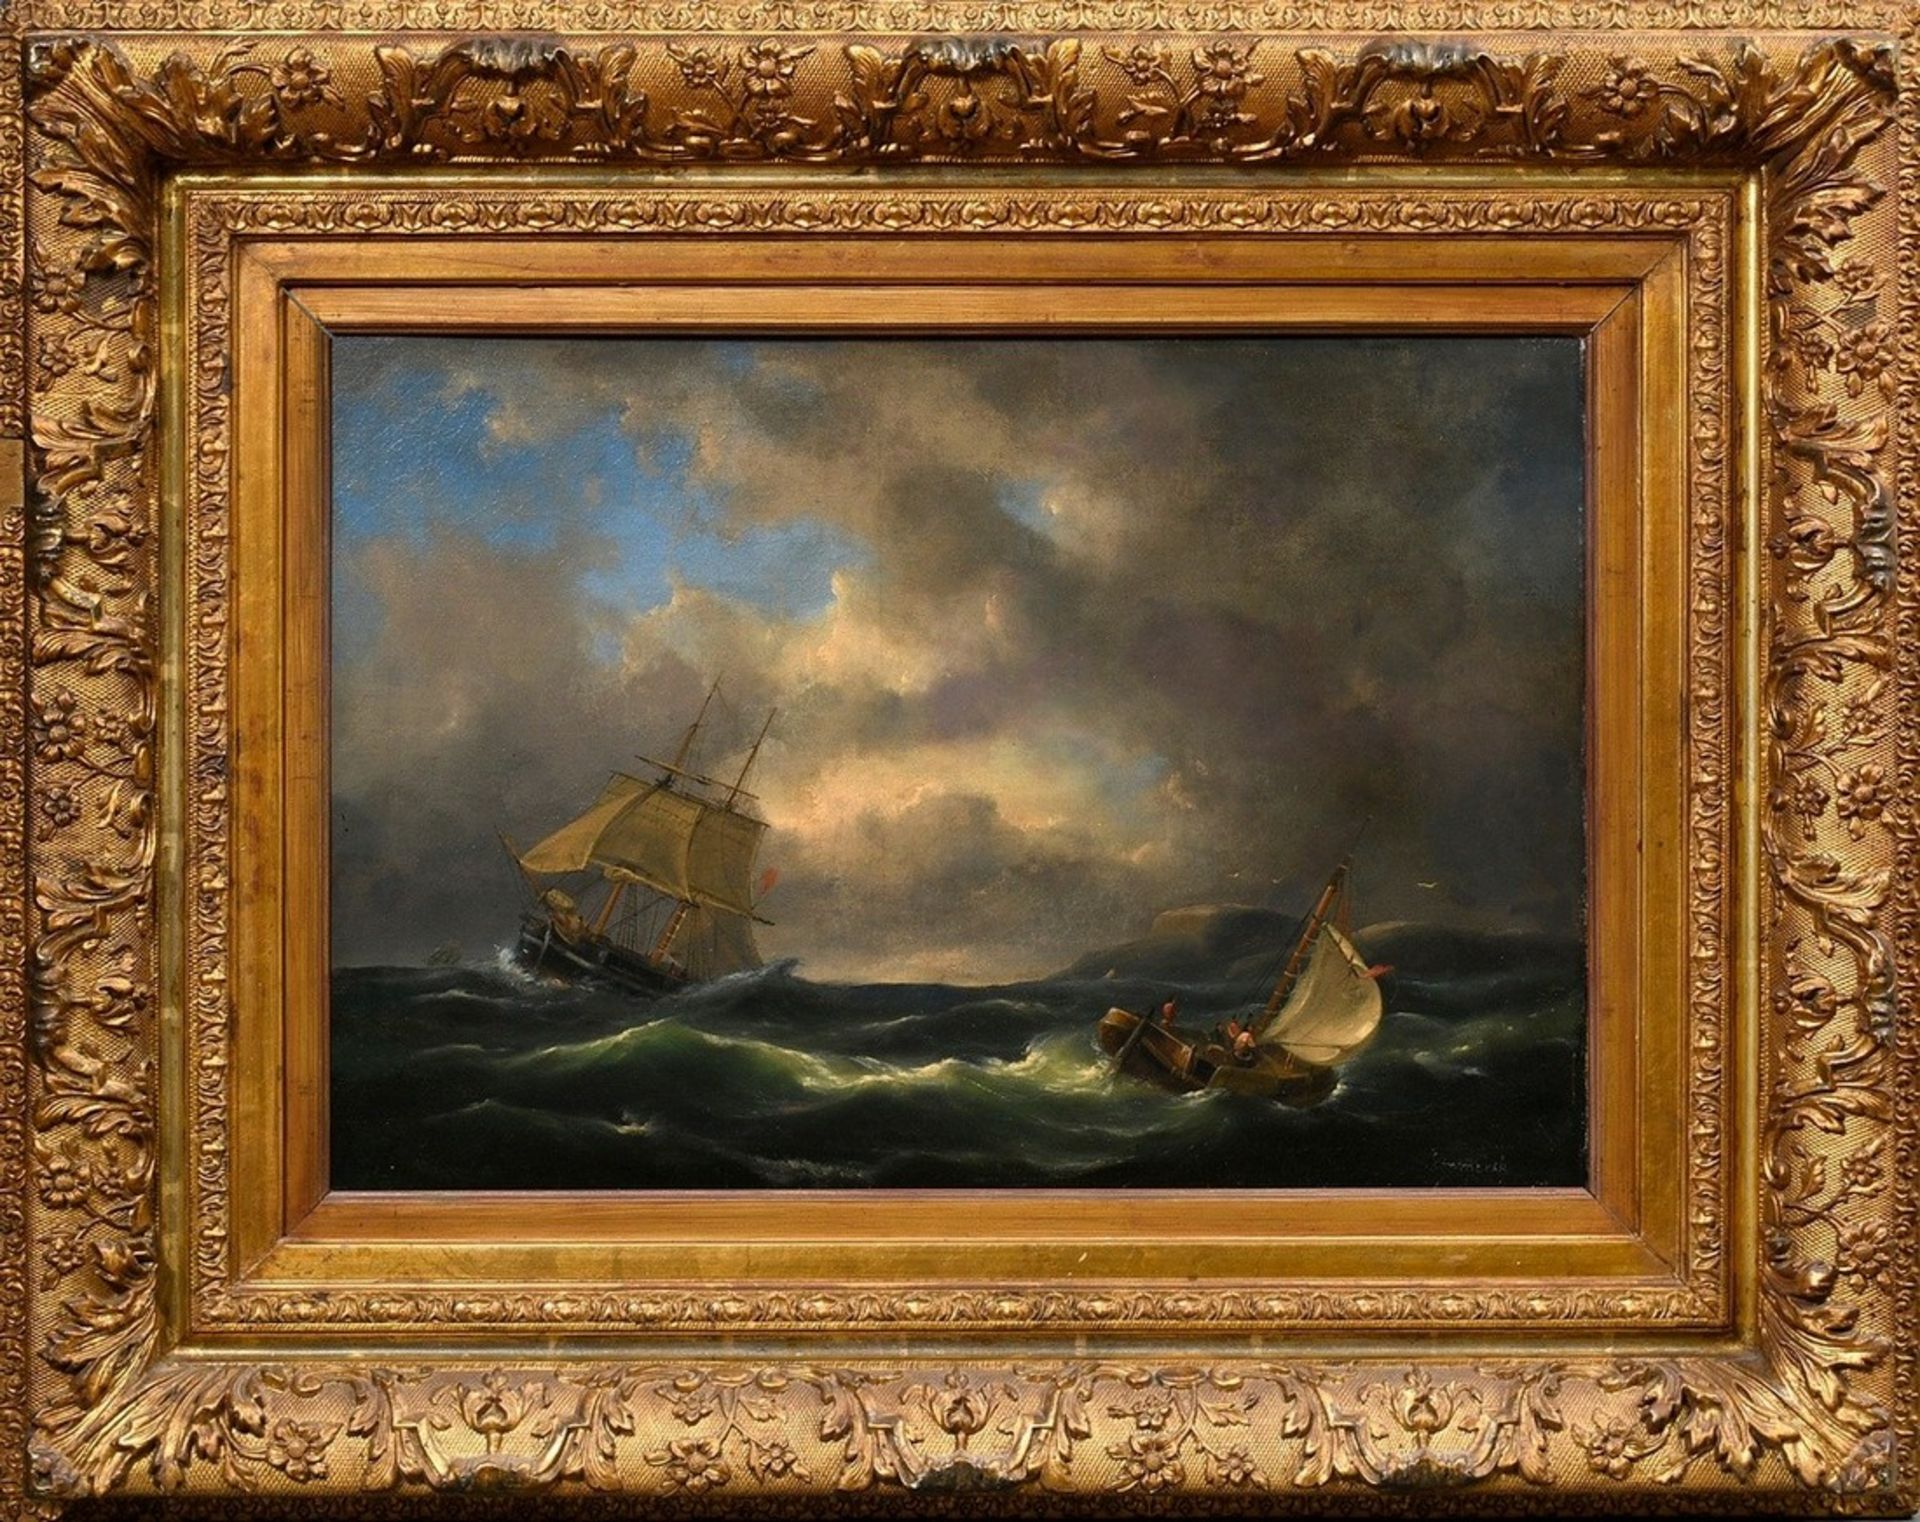 Emmerik, Govert van (1808-1882) "Ships in stormy sea", oil/canvas probably doubled, lower right sig - Image 2 of 6